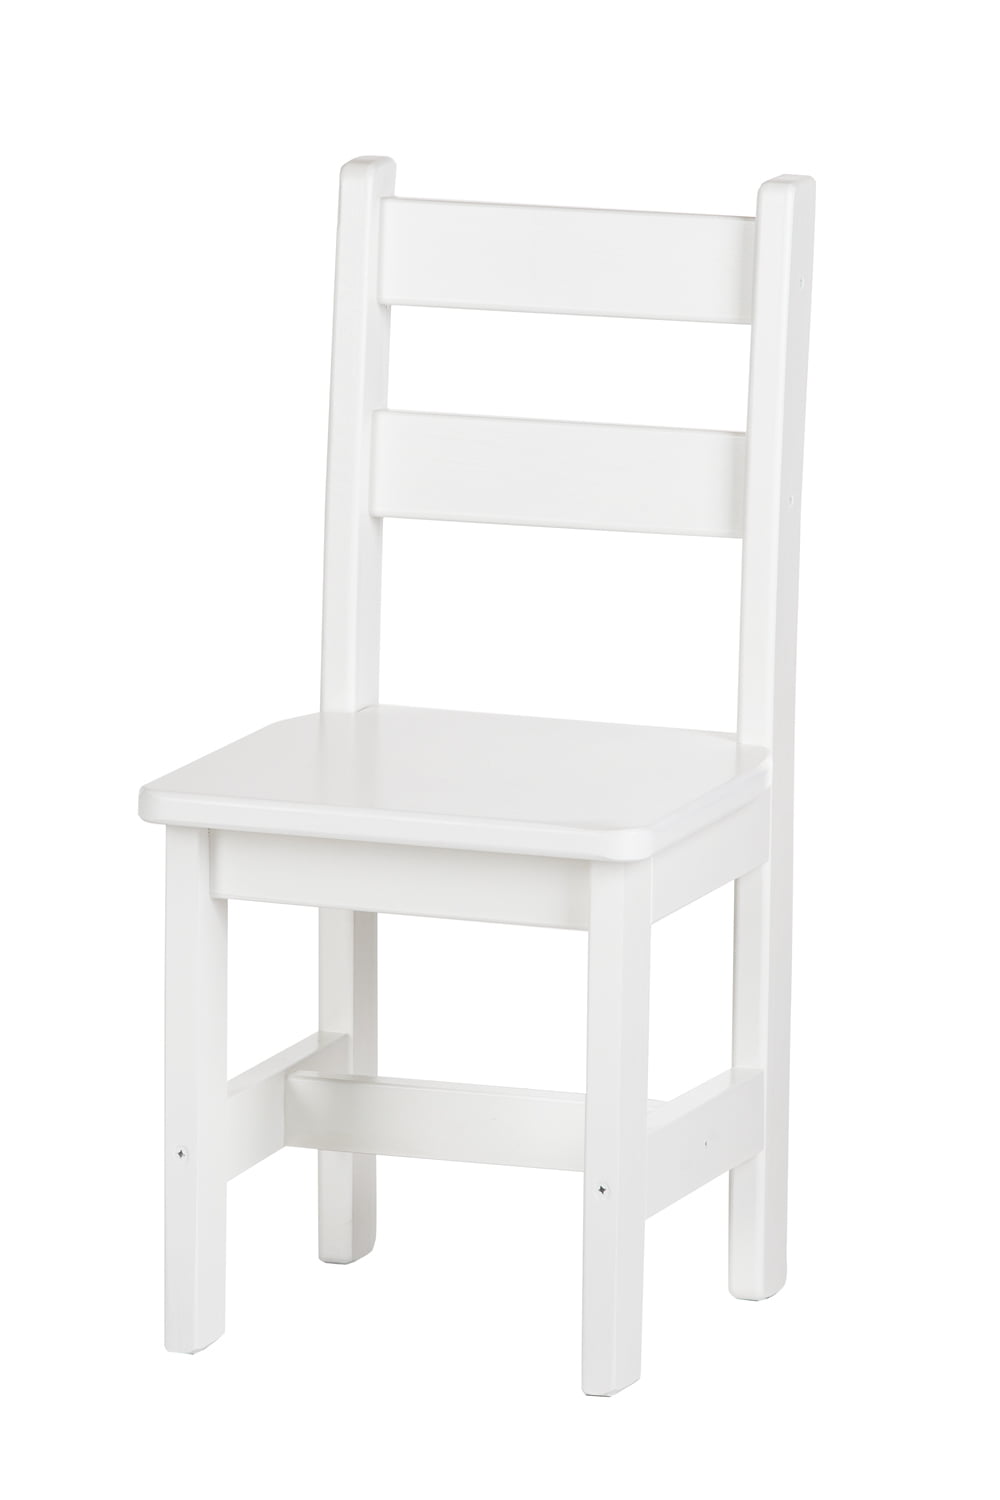 Child's Real Wood Chair - White